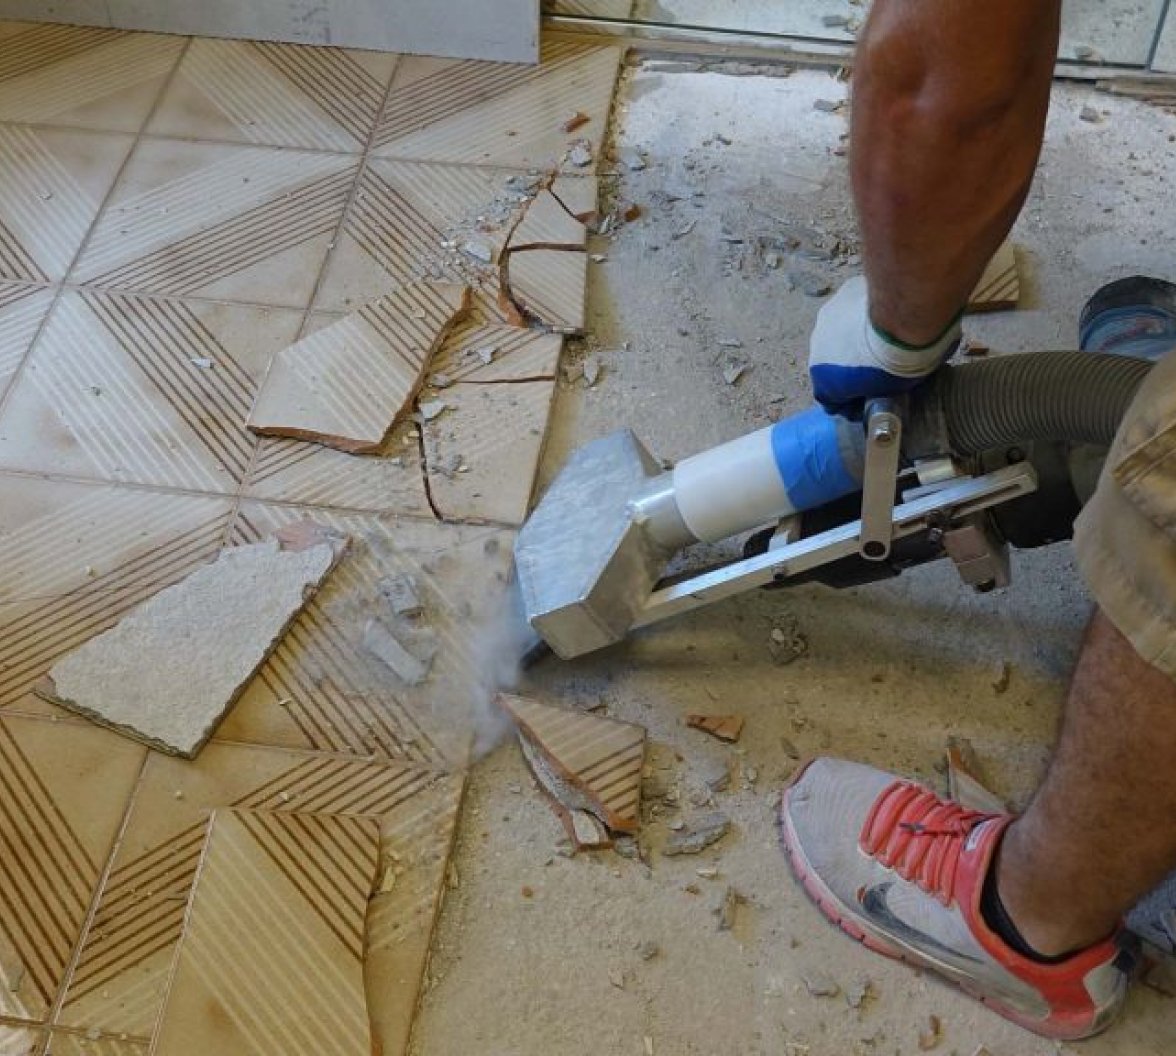 The nitty gritty of flooring removal